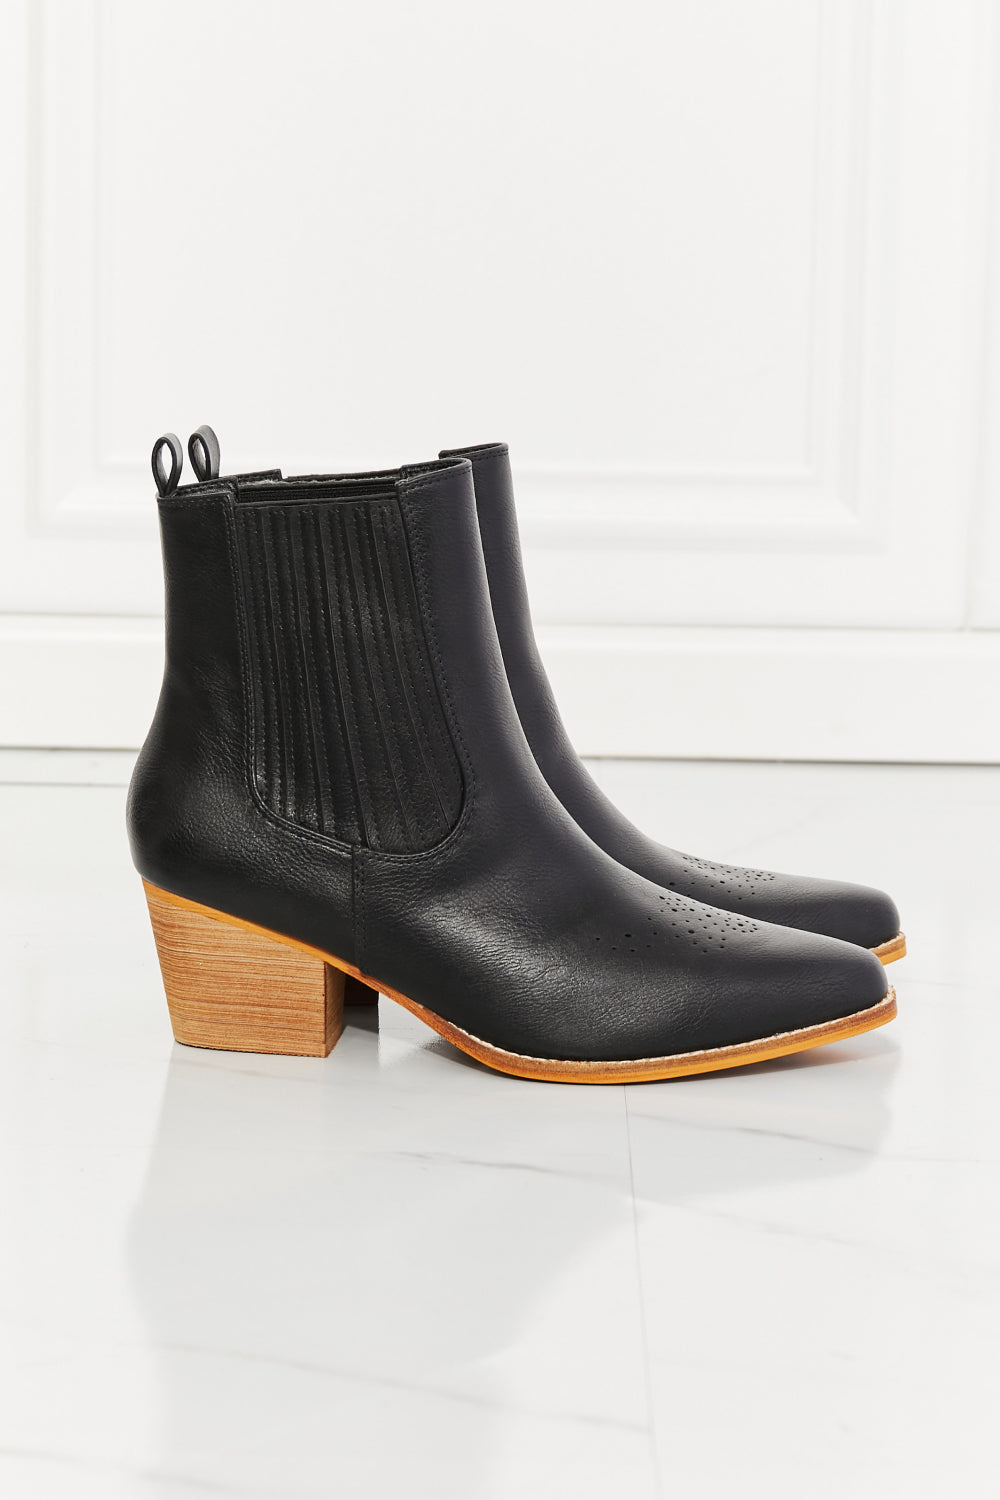 Love the Journey Stacked Heel Chelsea Boot in Black - Copper + Rose